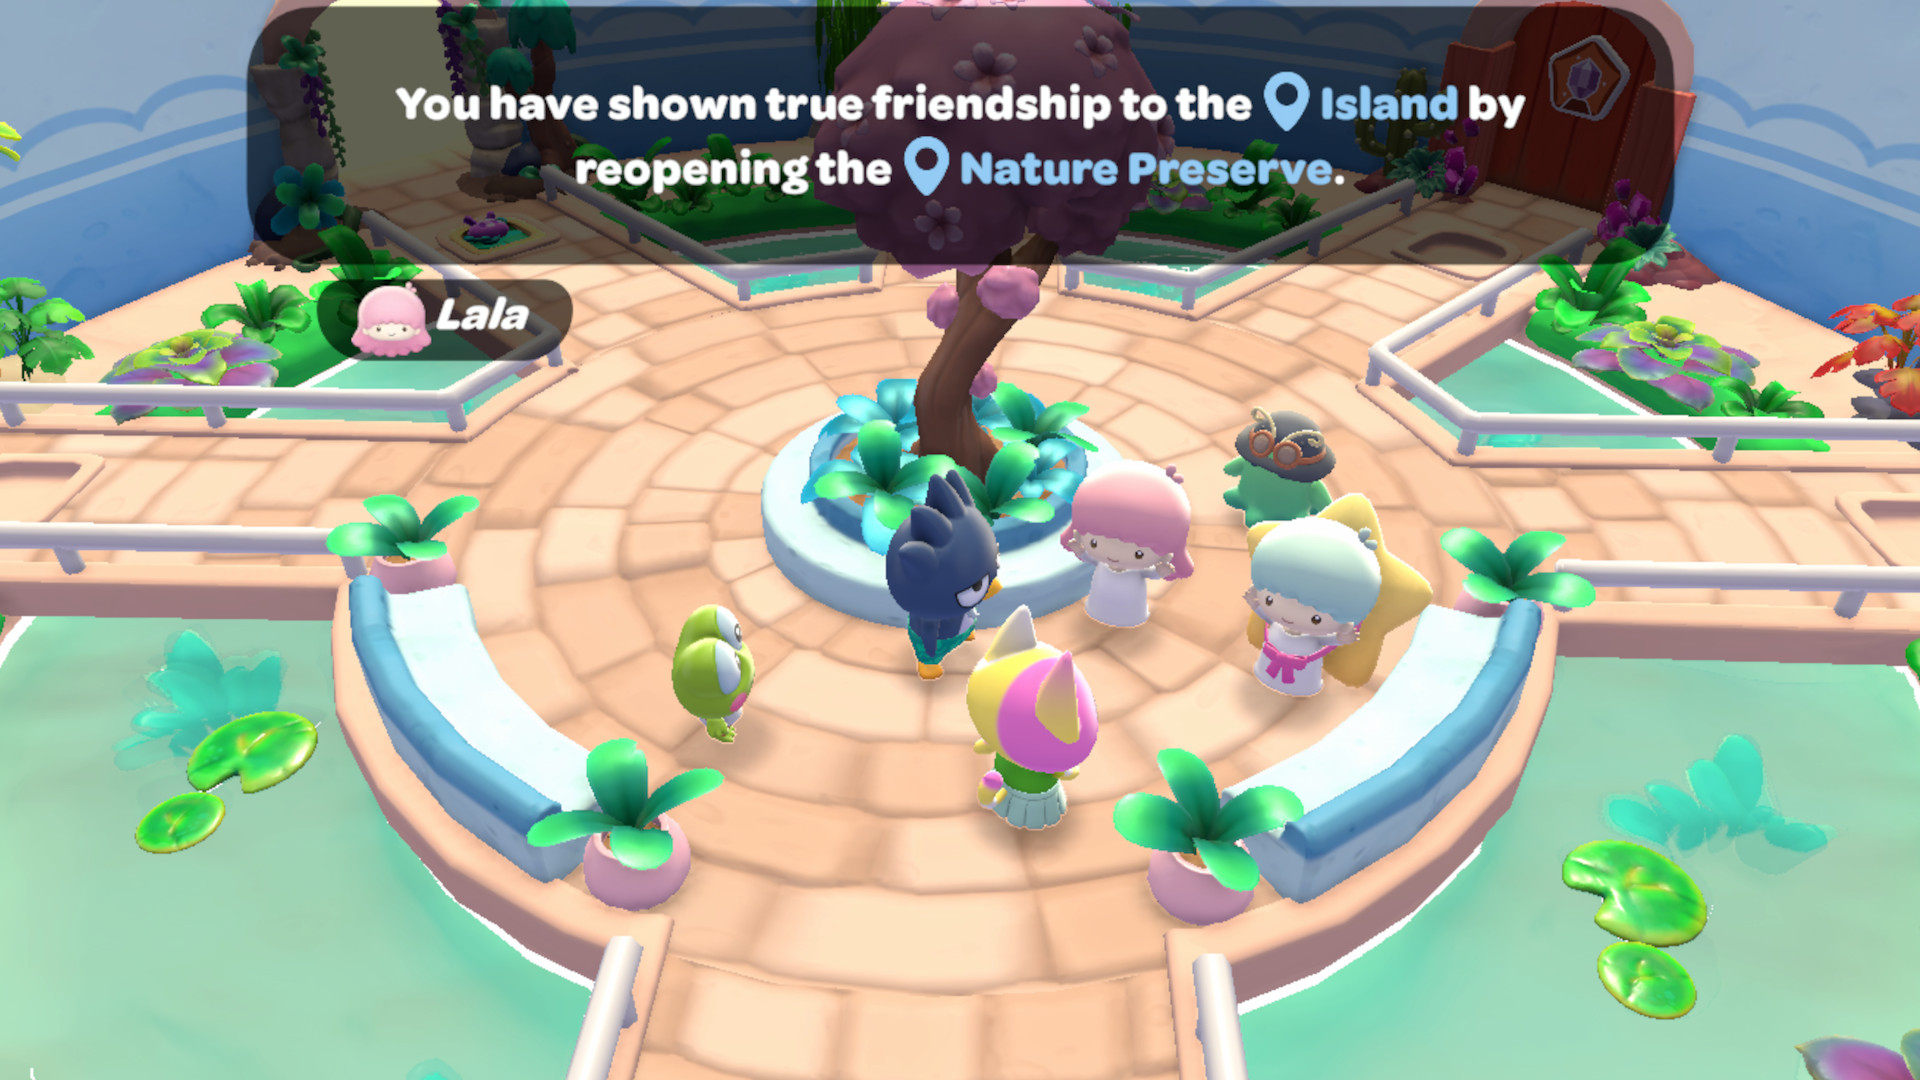 Hello Kitty Island Adventure review – a tropical paradise